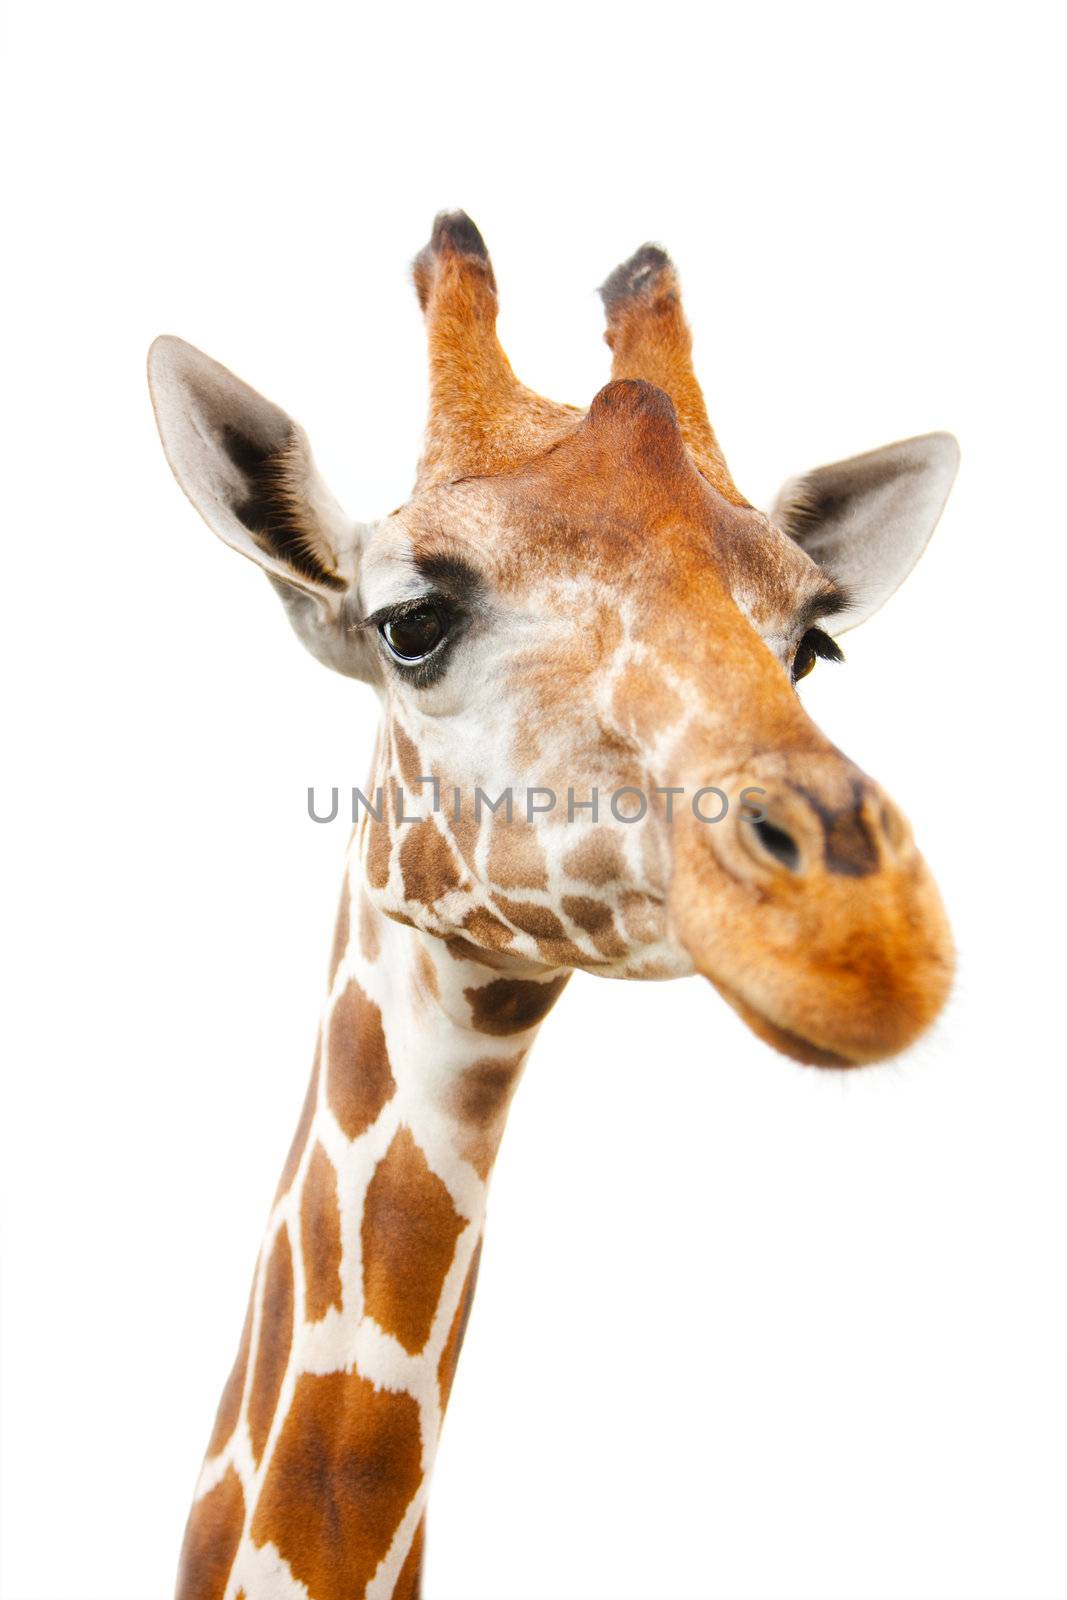 Closeup portrait of giraffe over white background with focus on eyes